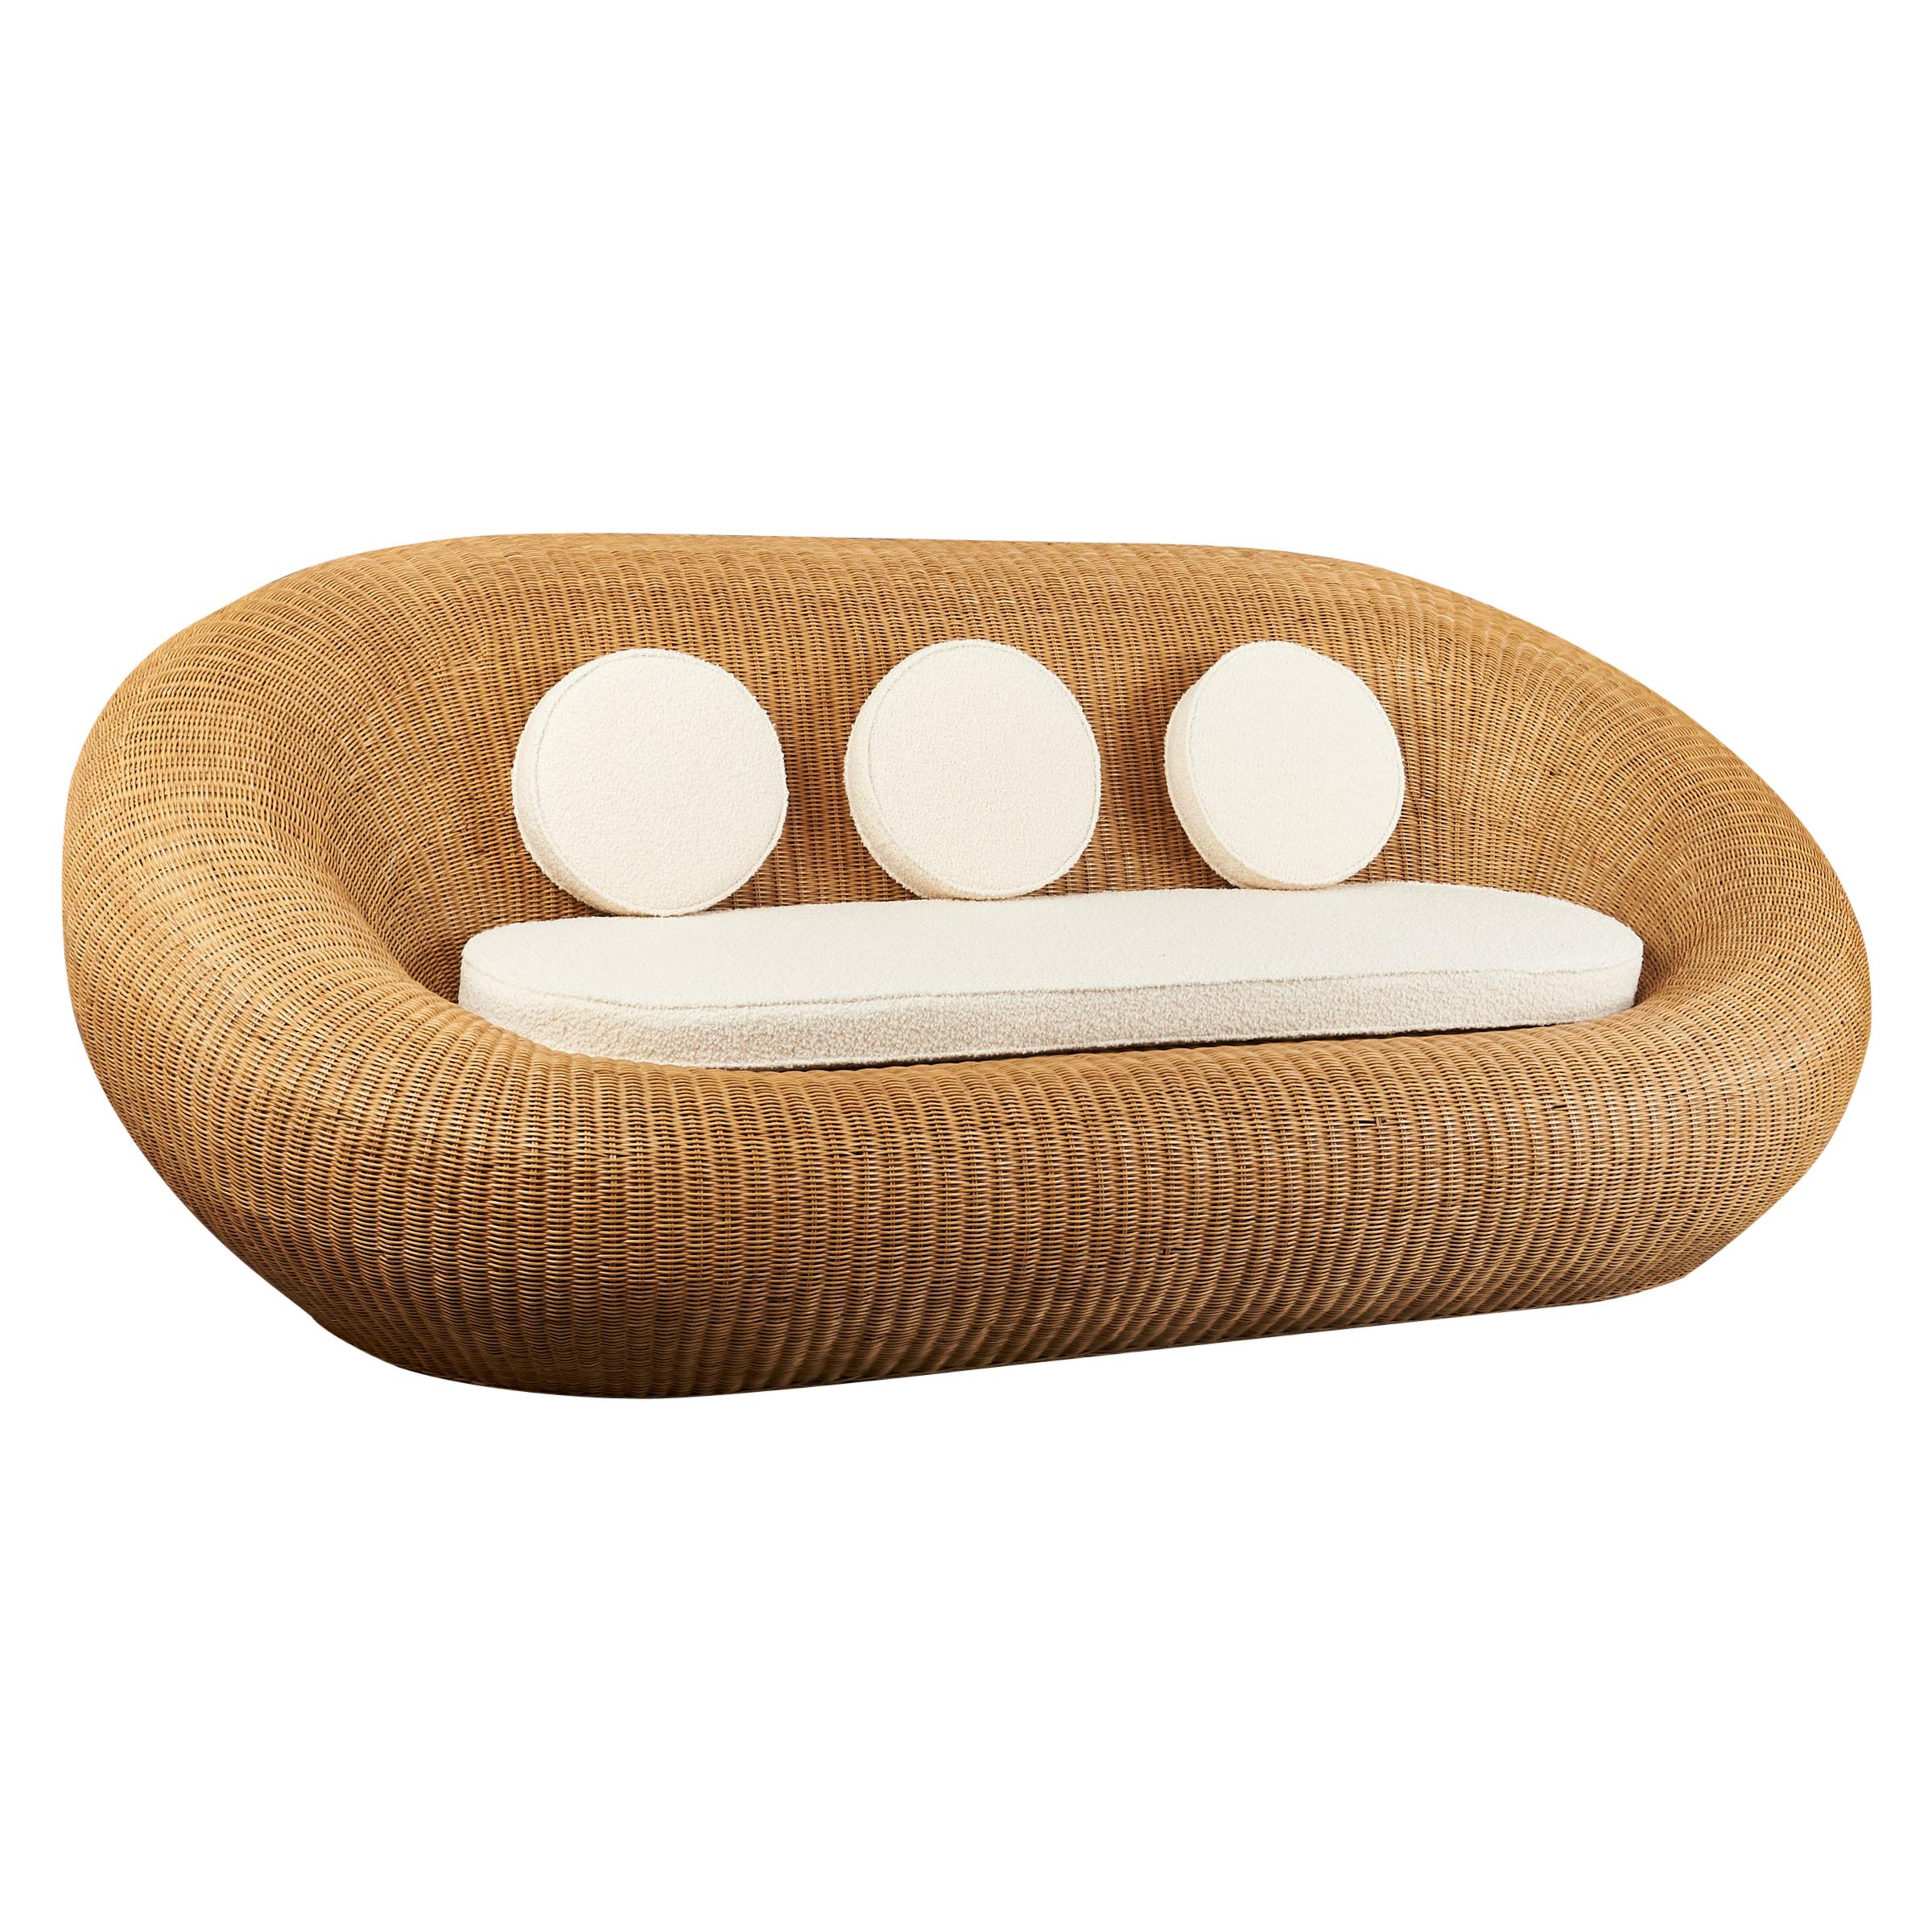 Woven Rattan Oval Shaped Couch, ca. 1999